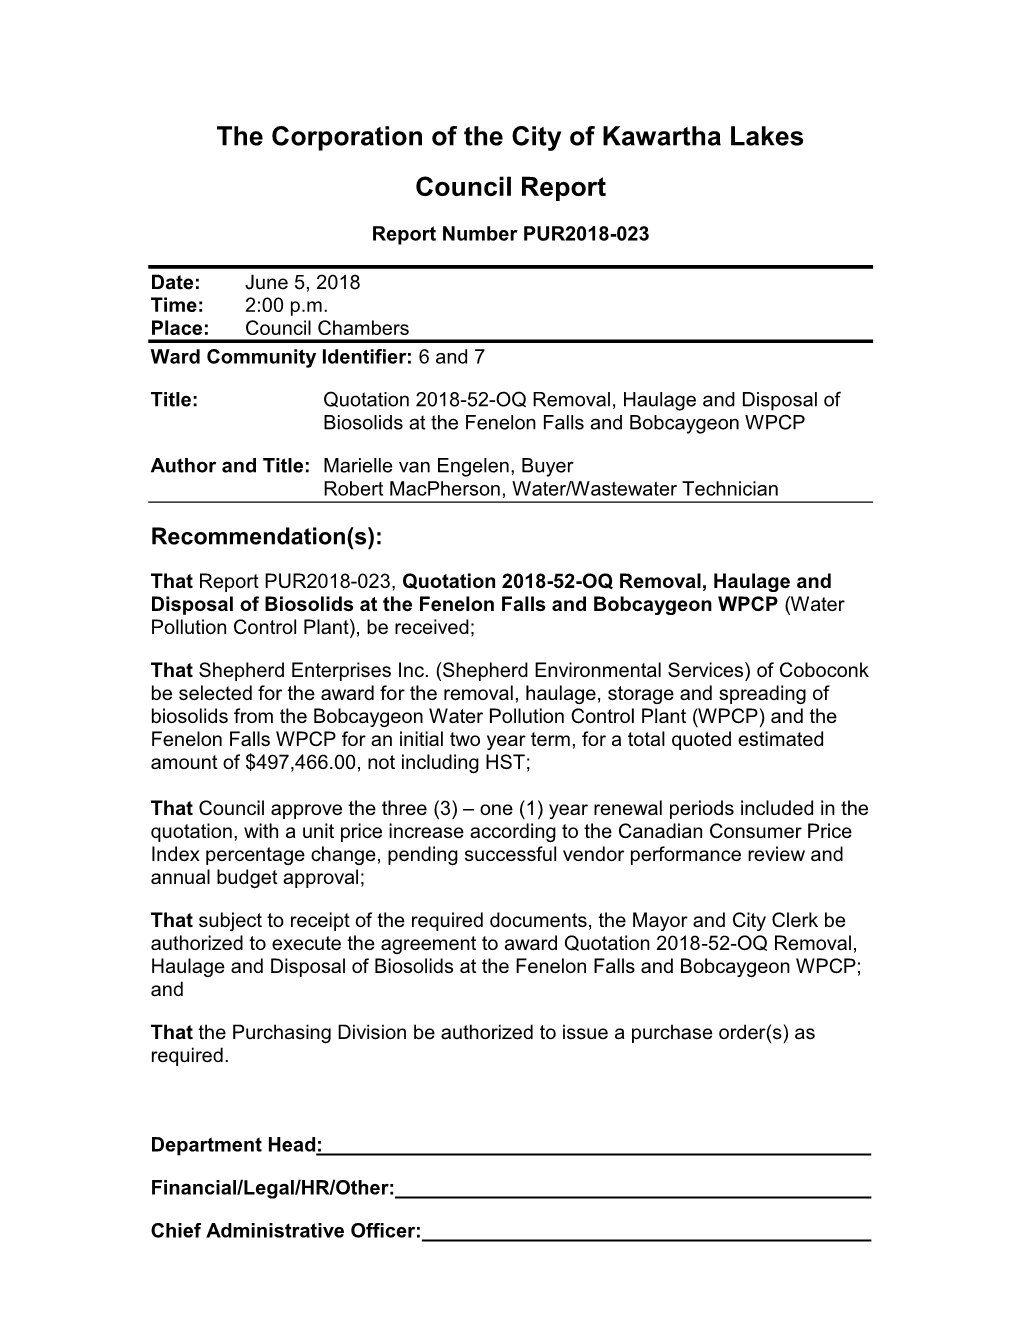 The Corporation of the City of Kawartha Lakes Council Report